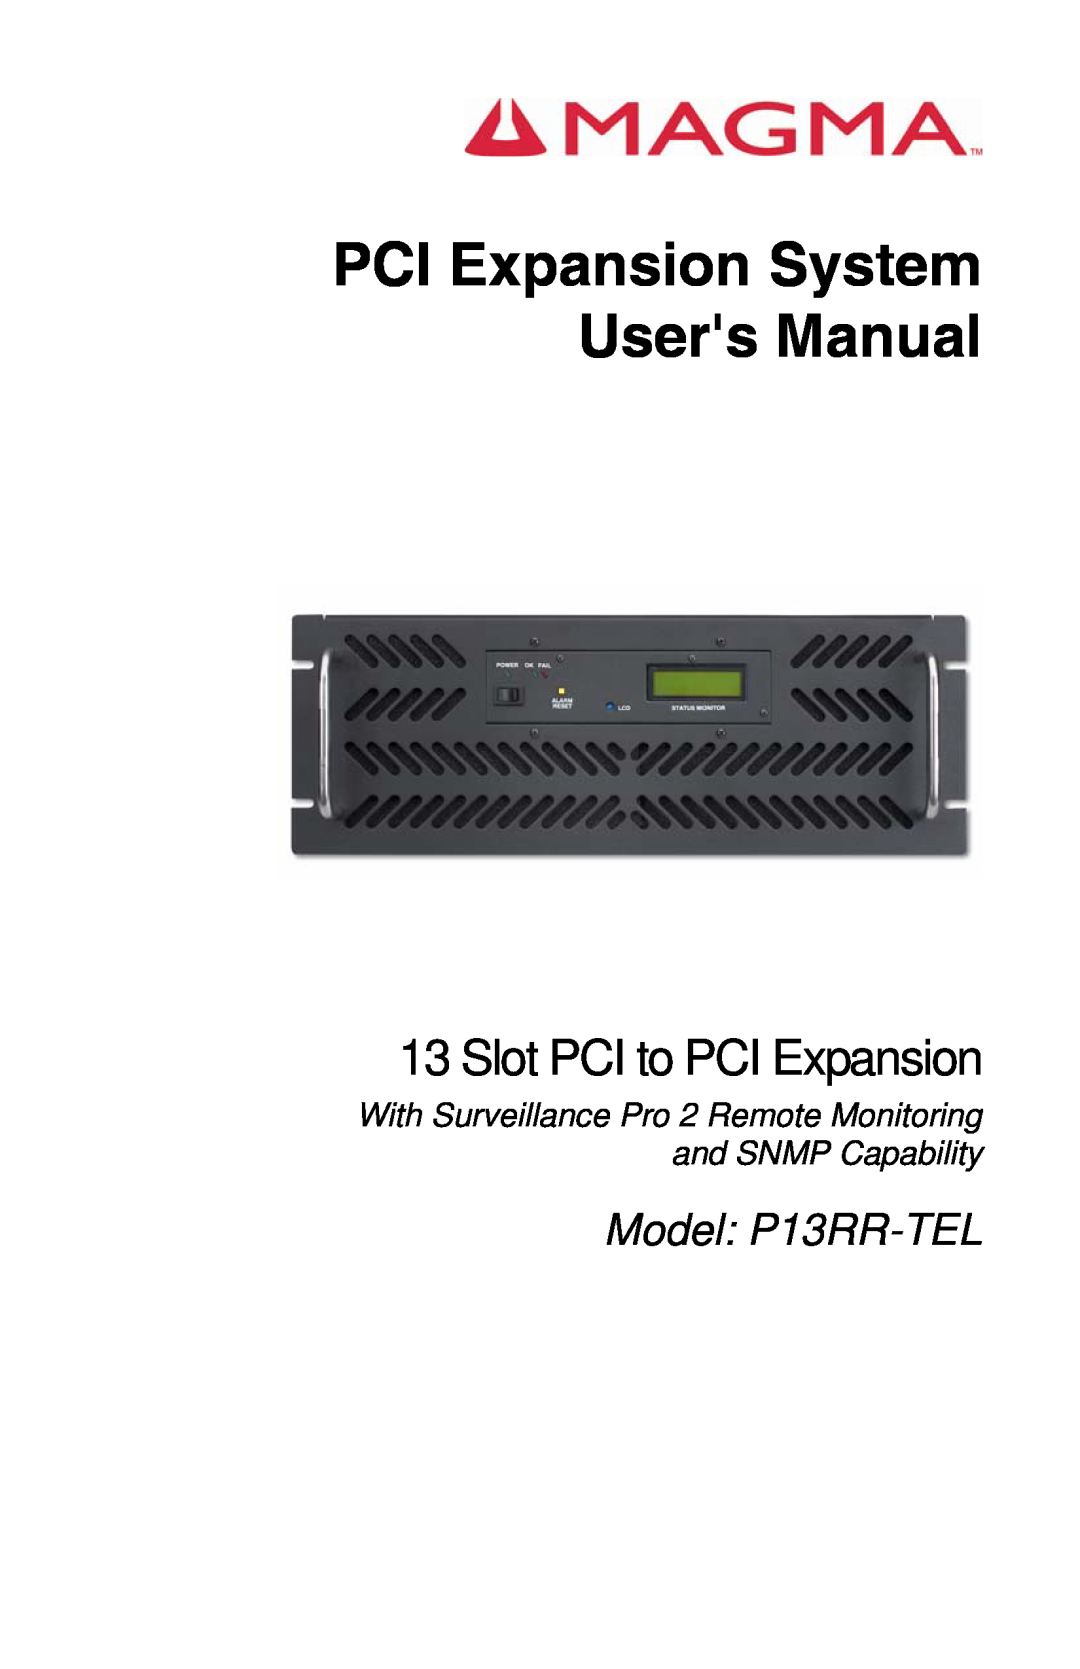 Magma user manual PCI Expansion System Users Manual, Slot PCI to PCI Expansion, Model P13RR-TEL 